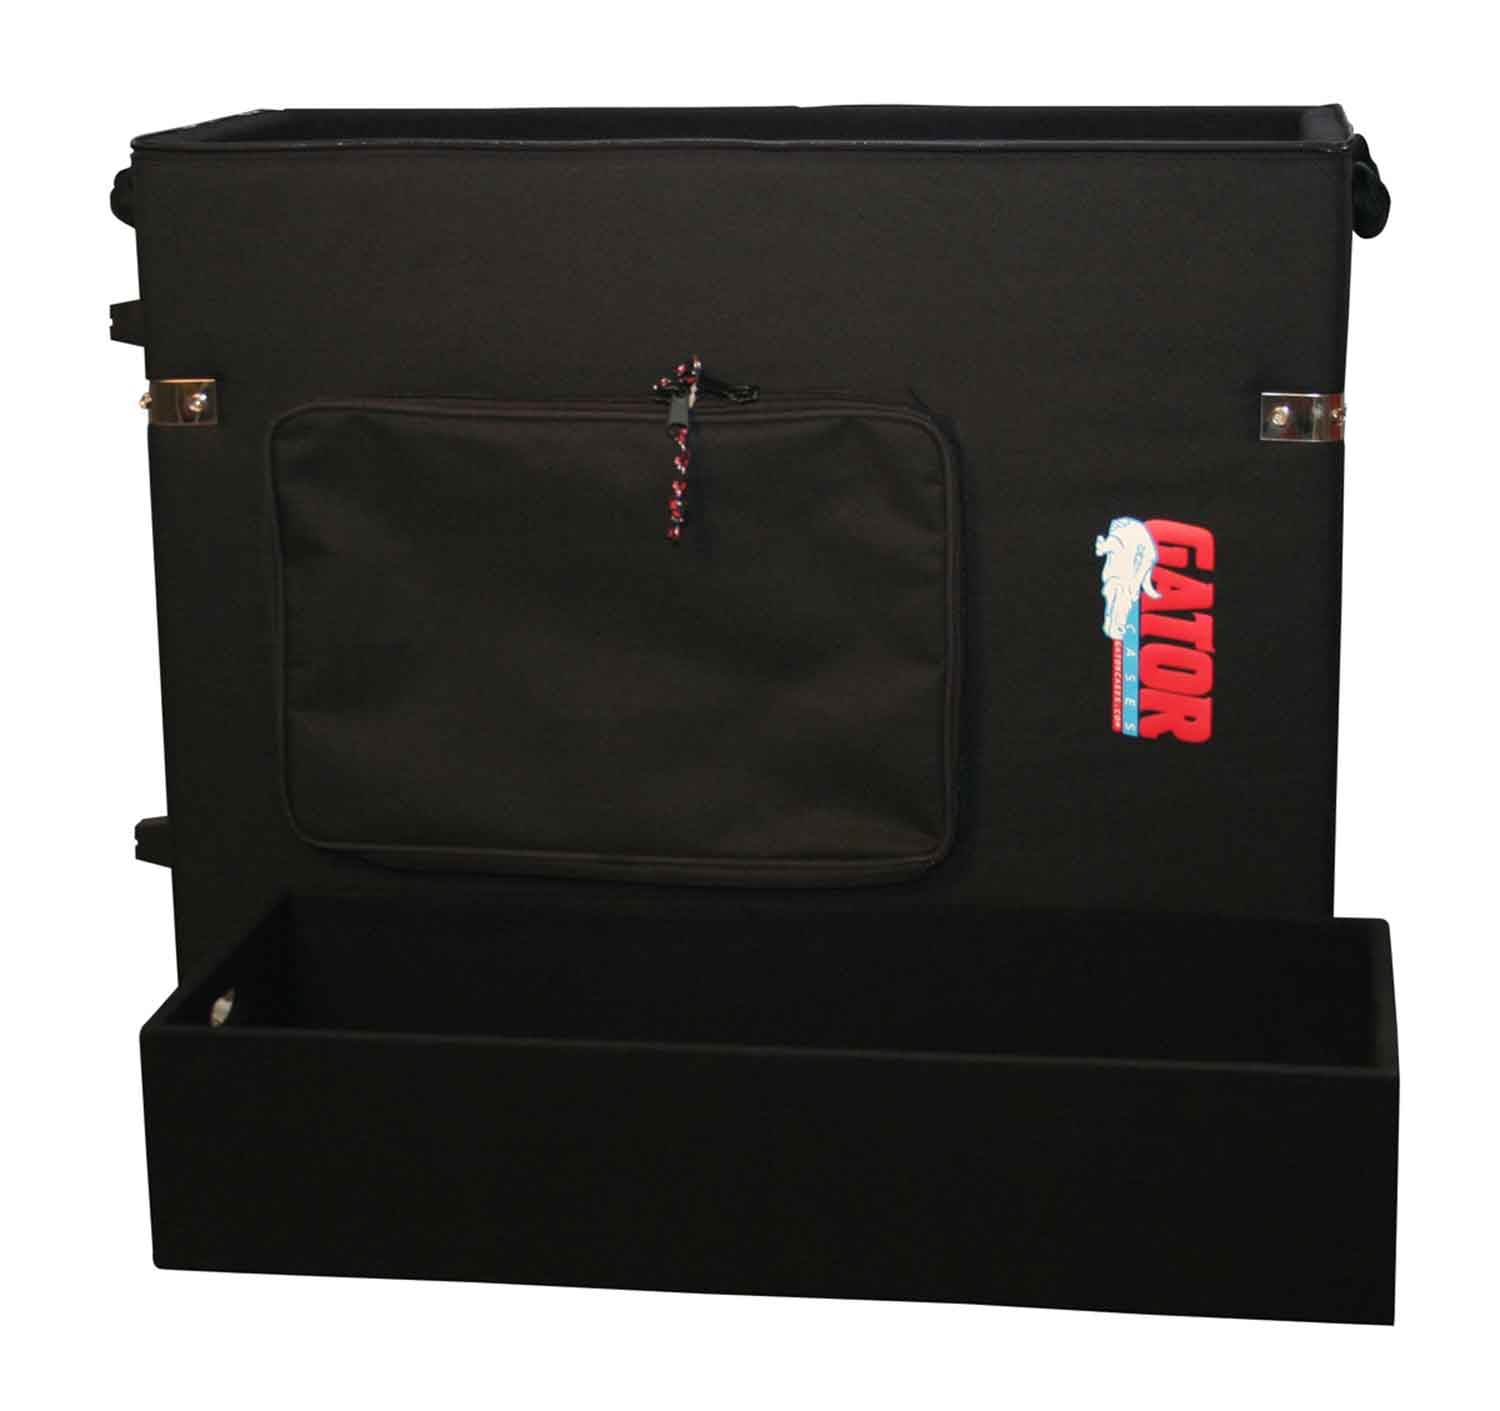 Gator Cases GX-22 Cargo Case with Wheels - Larger Size - Hollywood DJ